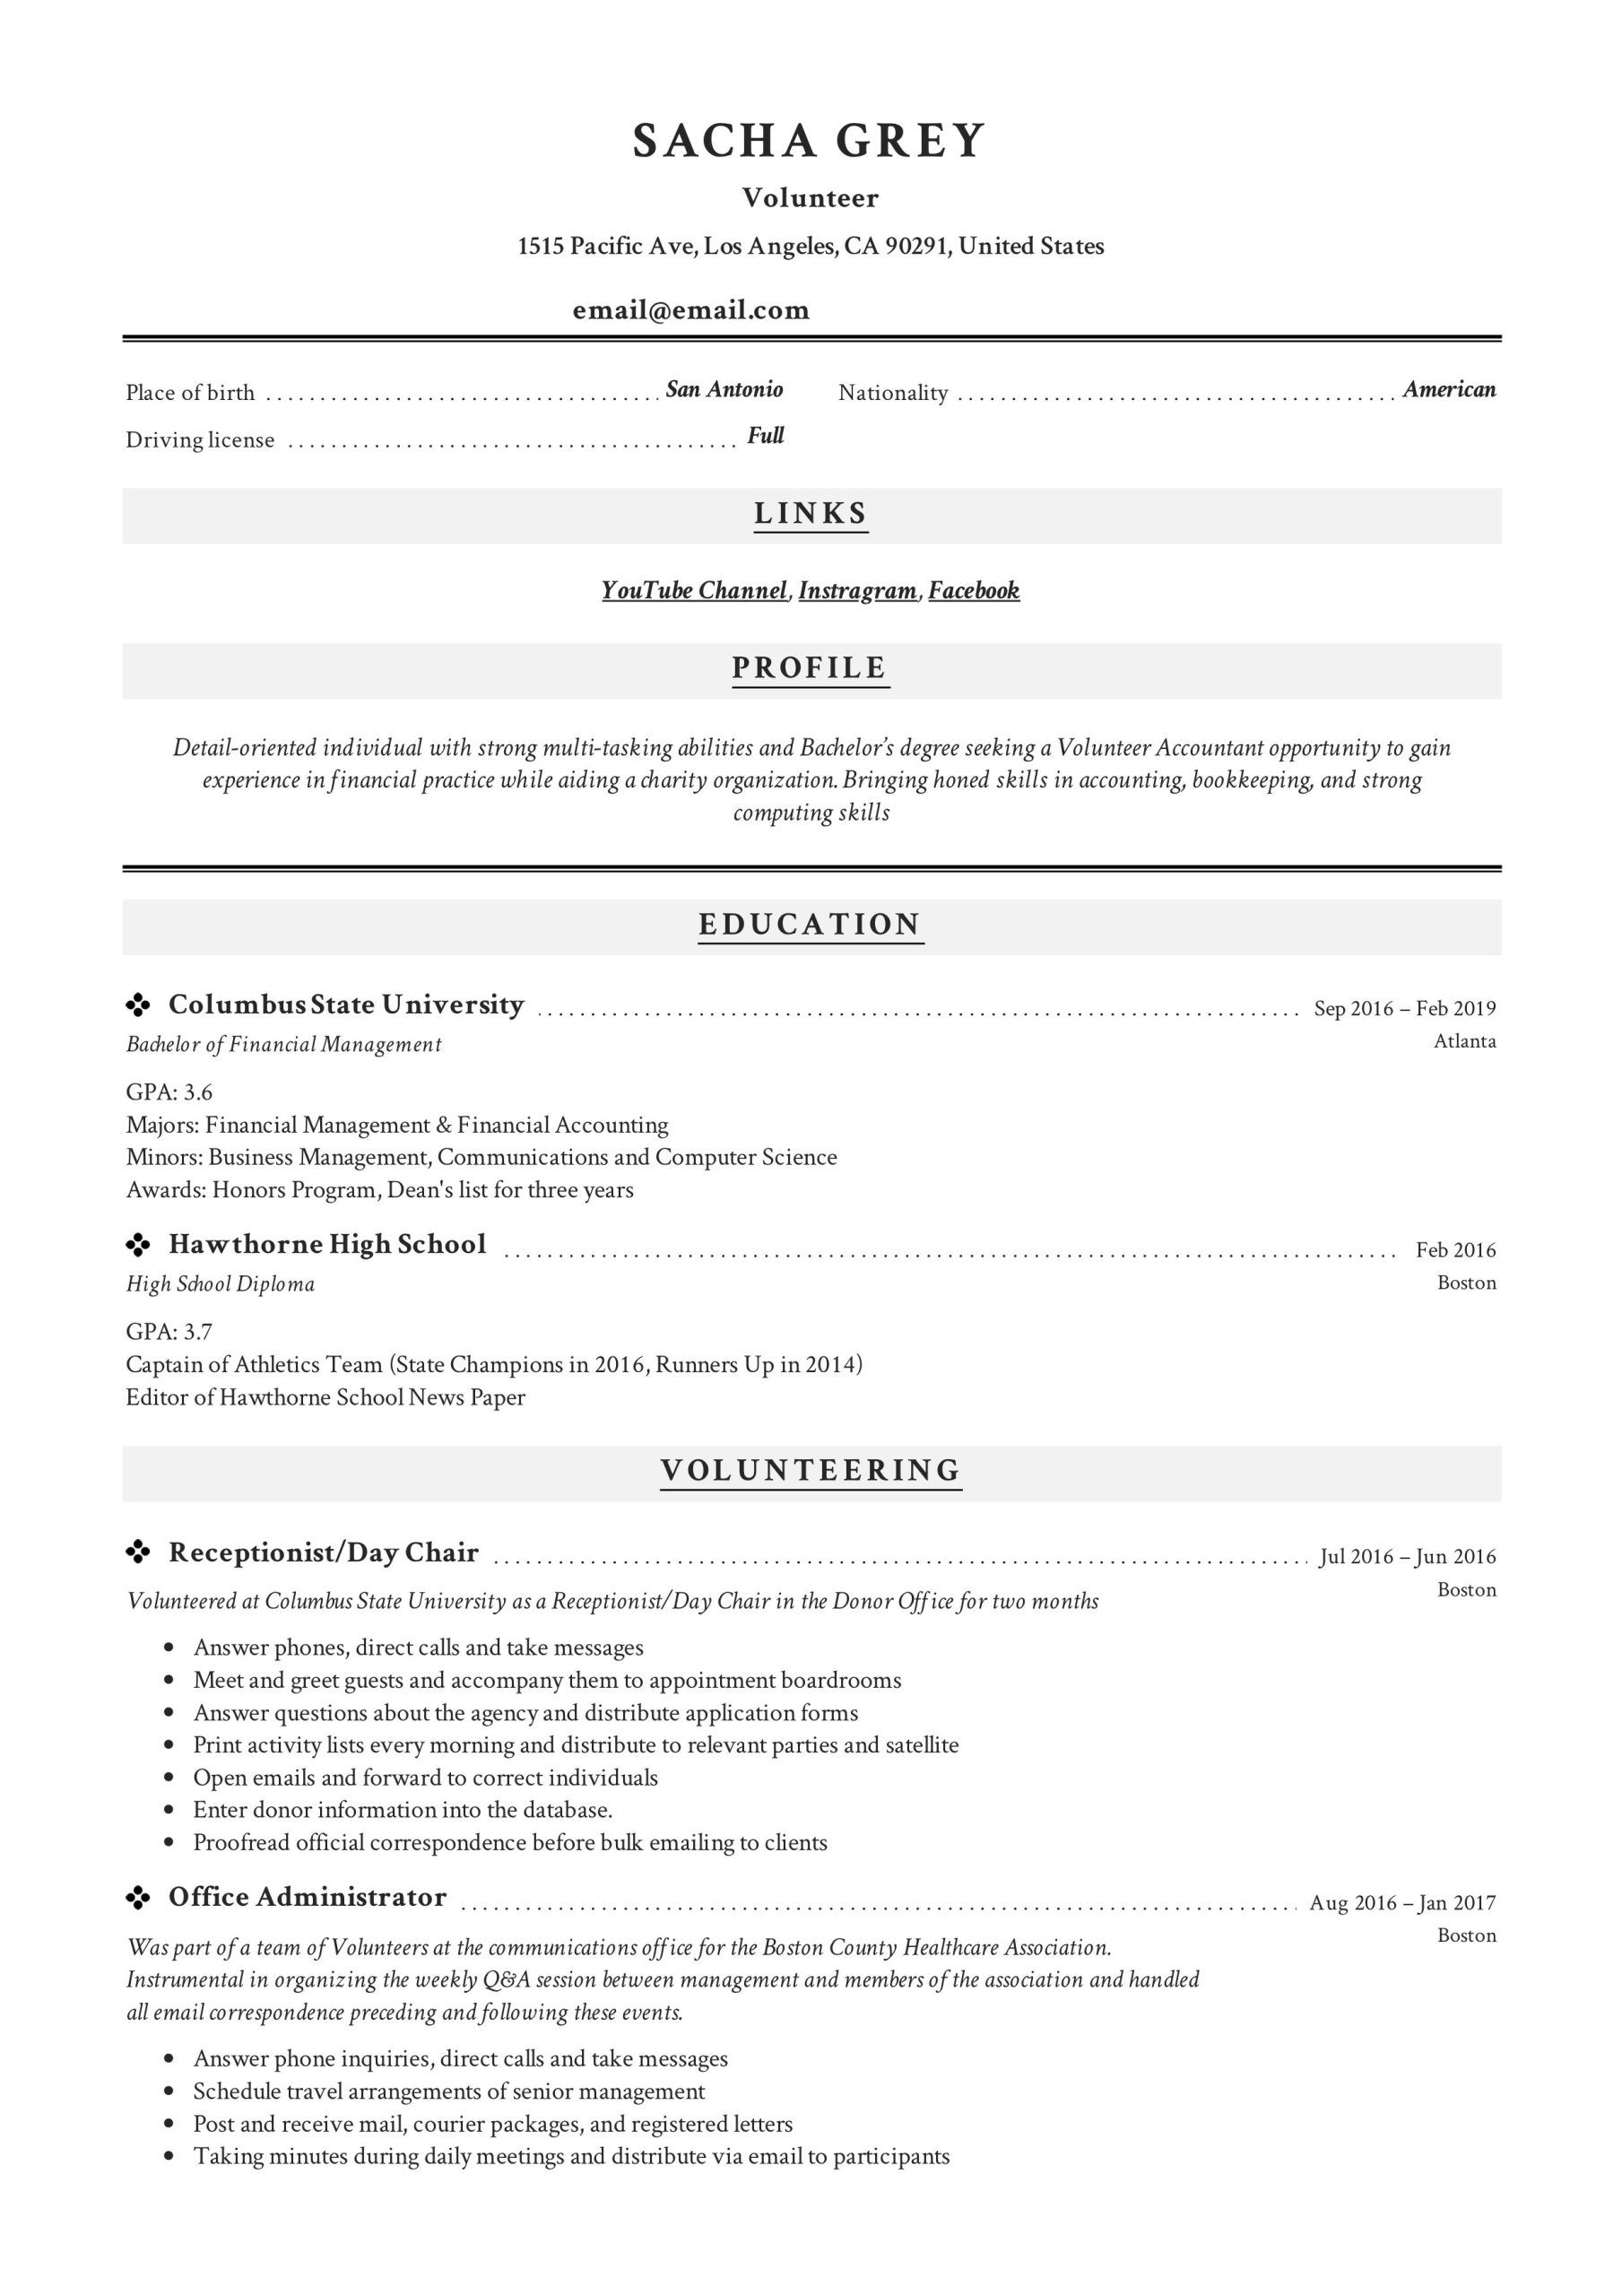 Volunteer Experience at Community Eatery Resume Sample Volunteer Resume Sample & Writing Guide –   Pdf’s 2019